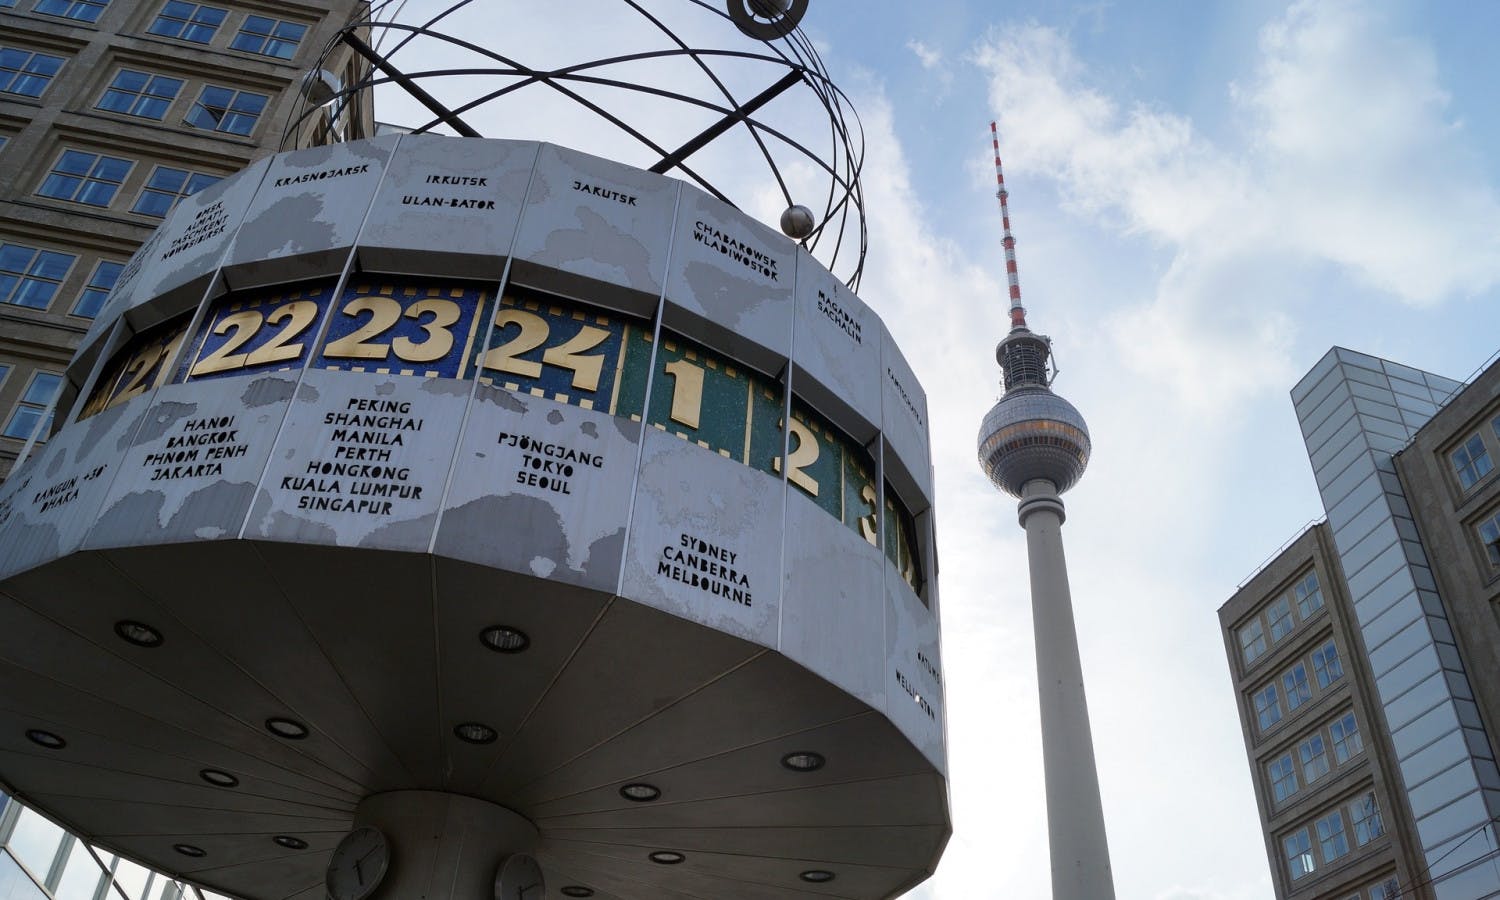 Berlin TV Tower skip-the-line ticket with inner circle restaurant seat